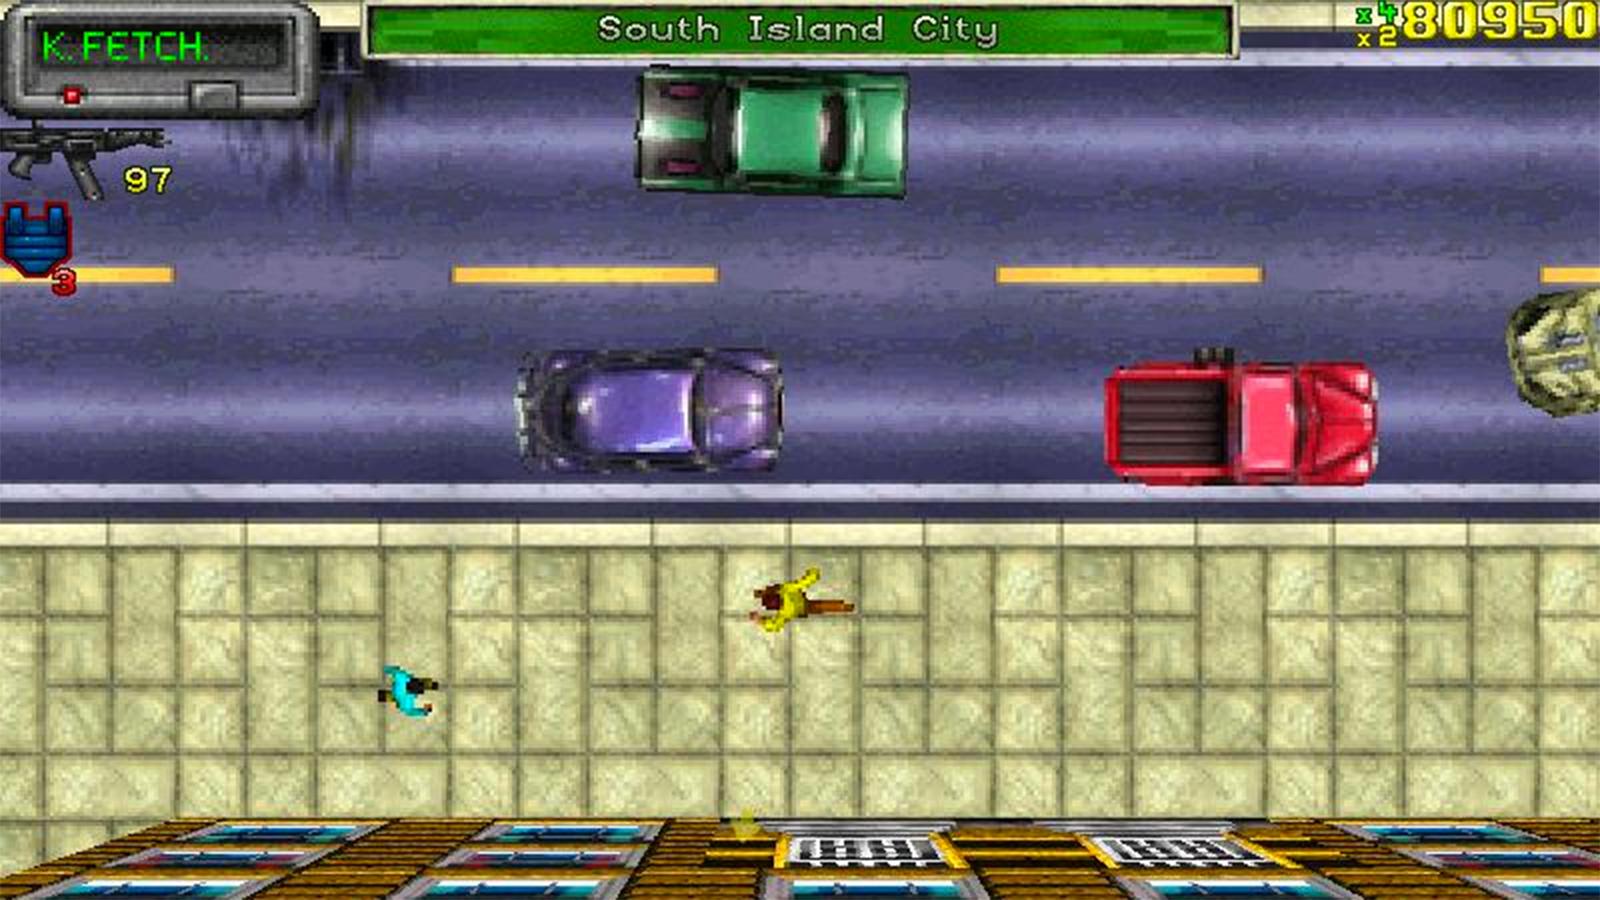 Cars driving across the road in the original 1997 Grand Theft Auto game